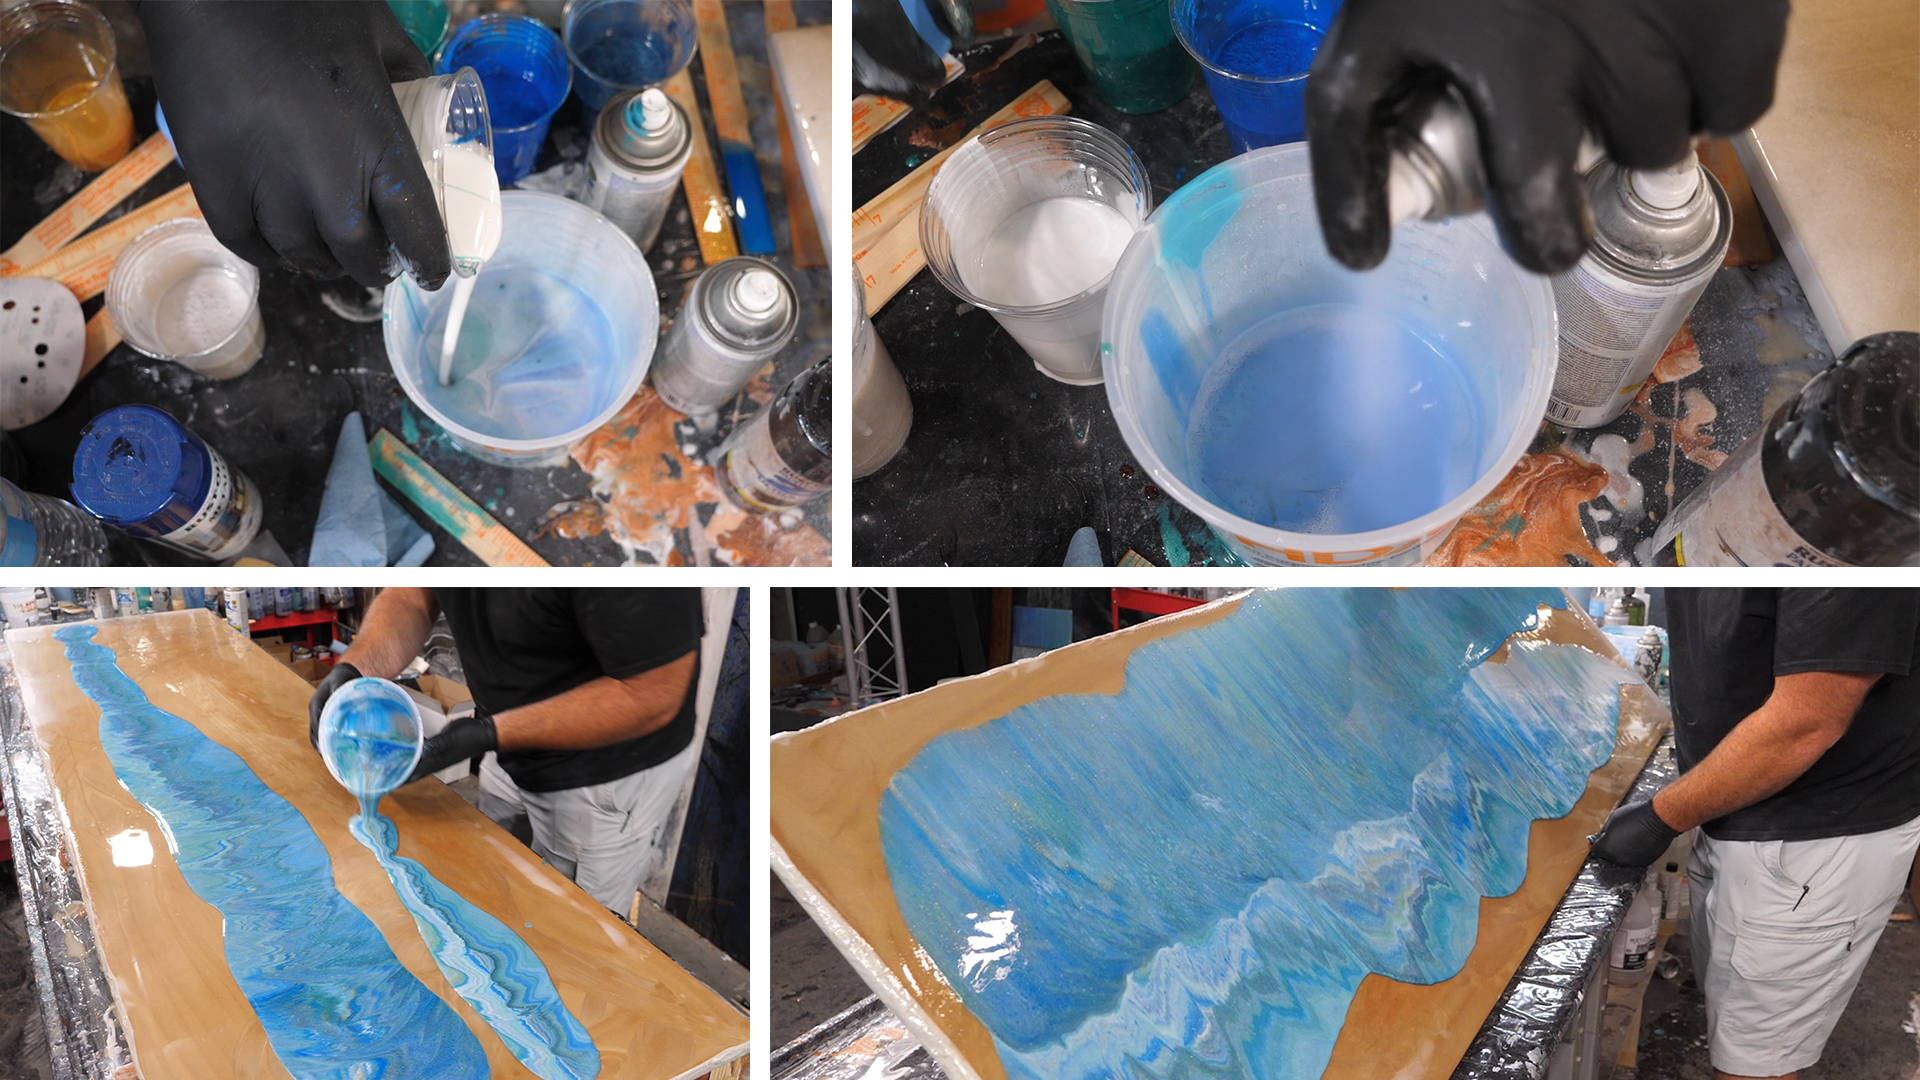 Step 3: Apply The Exotic Pour - Combine colored epoxy cups without manual mixing, pour randomly onto the project.